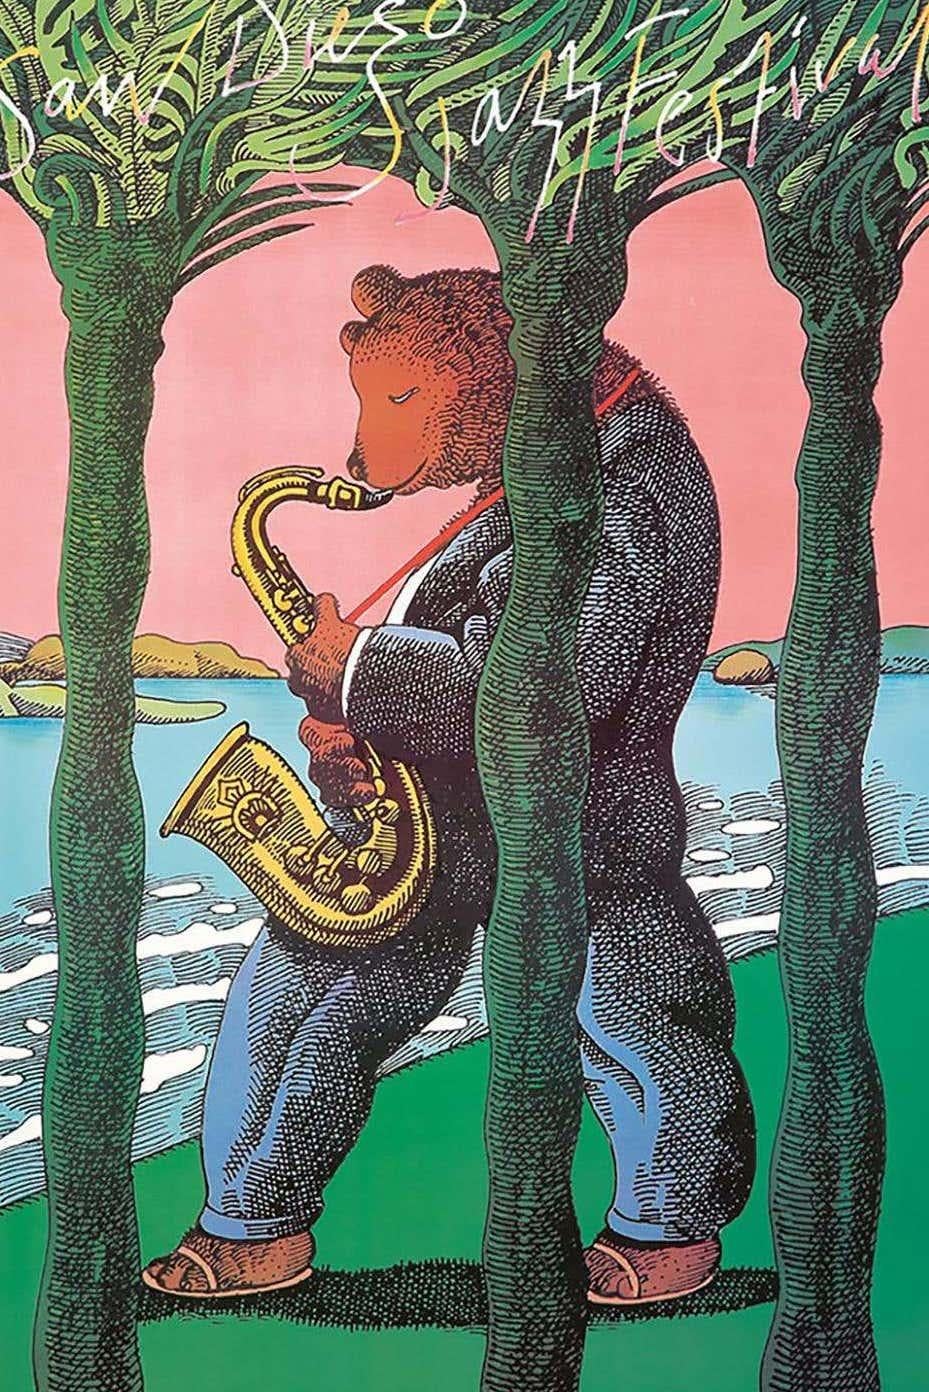 1980s Milton Glaser Poster Art: 
San Diego Jazz Festival: Vintage original Milton Glaser poster c.1983. Designed by Milton Glaser on the occasion of the San Diego Jazz Festival, a Pacific Coast event depicted with a suit-and-sandal clad bear at